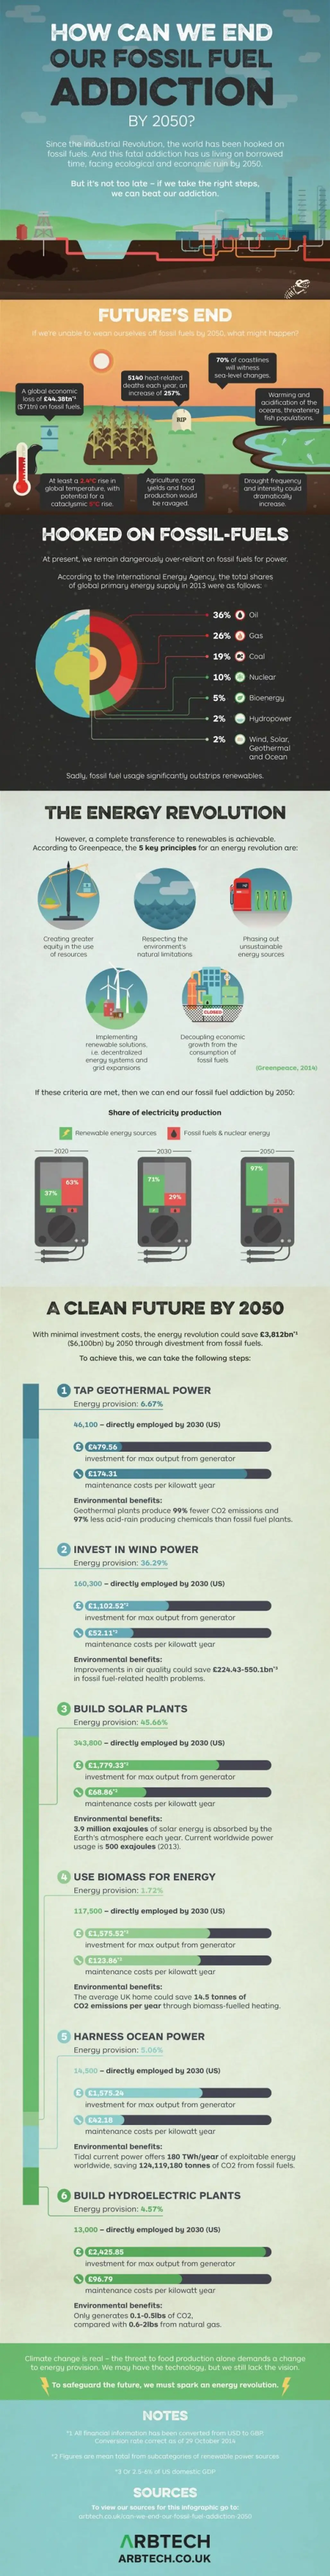 Can We End Our Fossil Fuel Addiction by 2050?